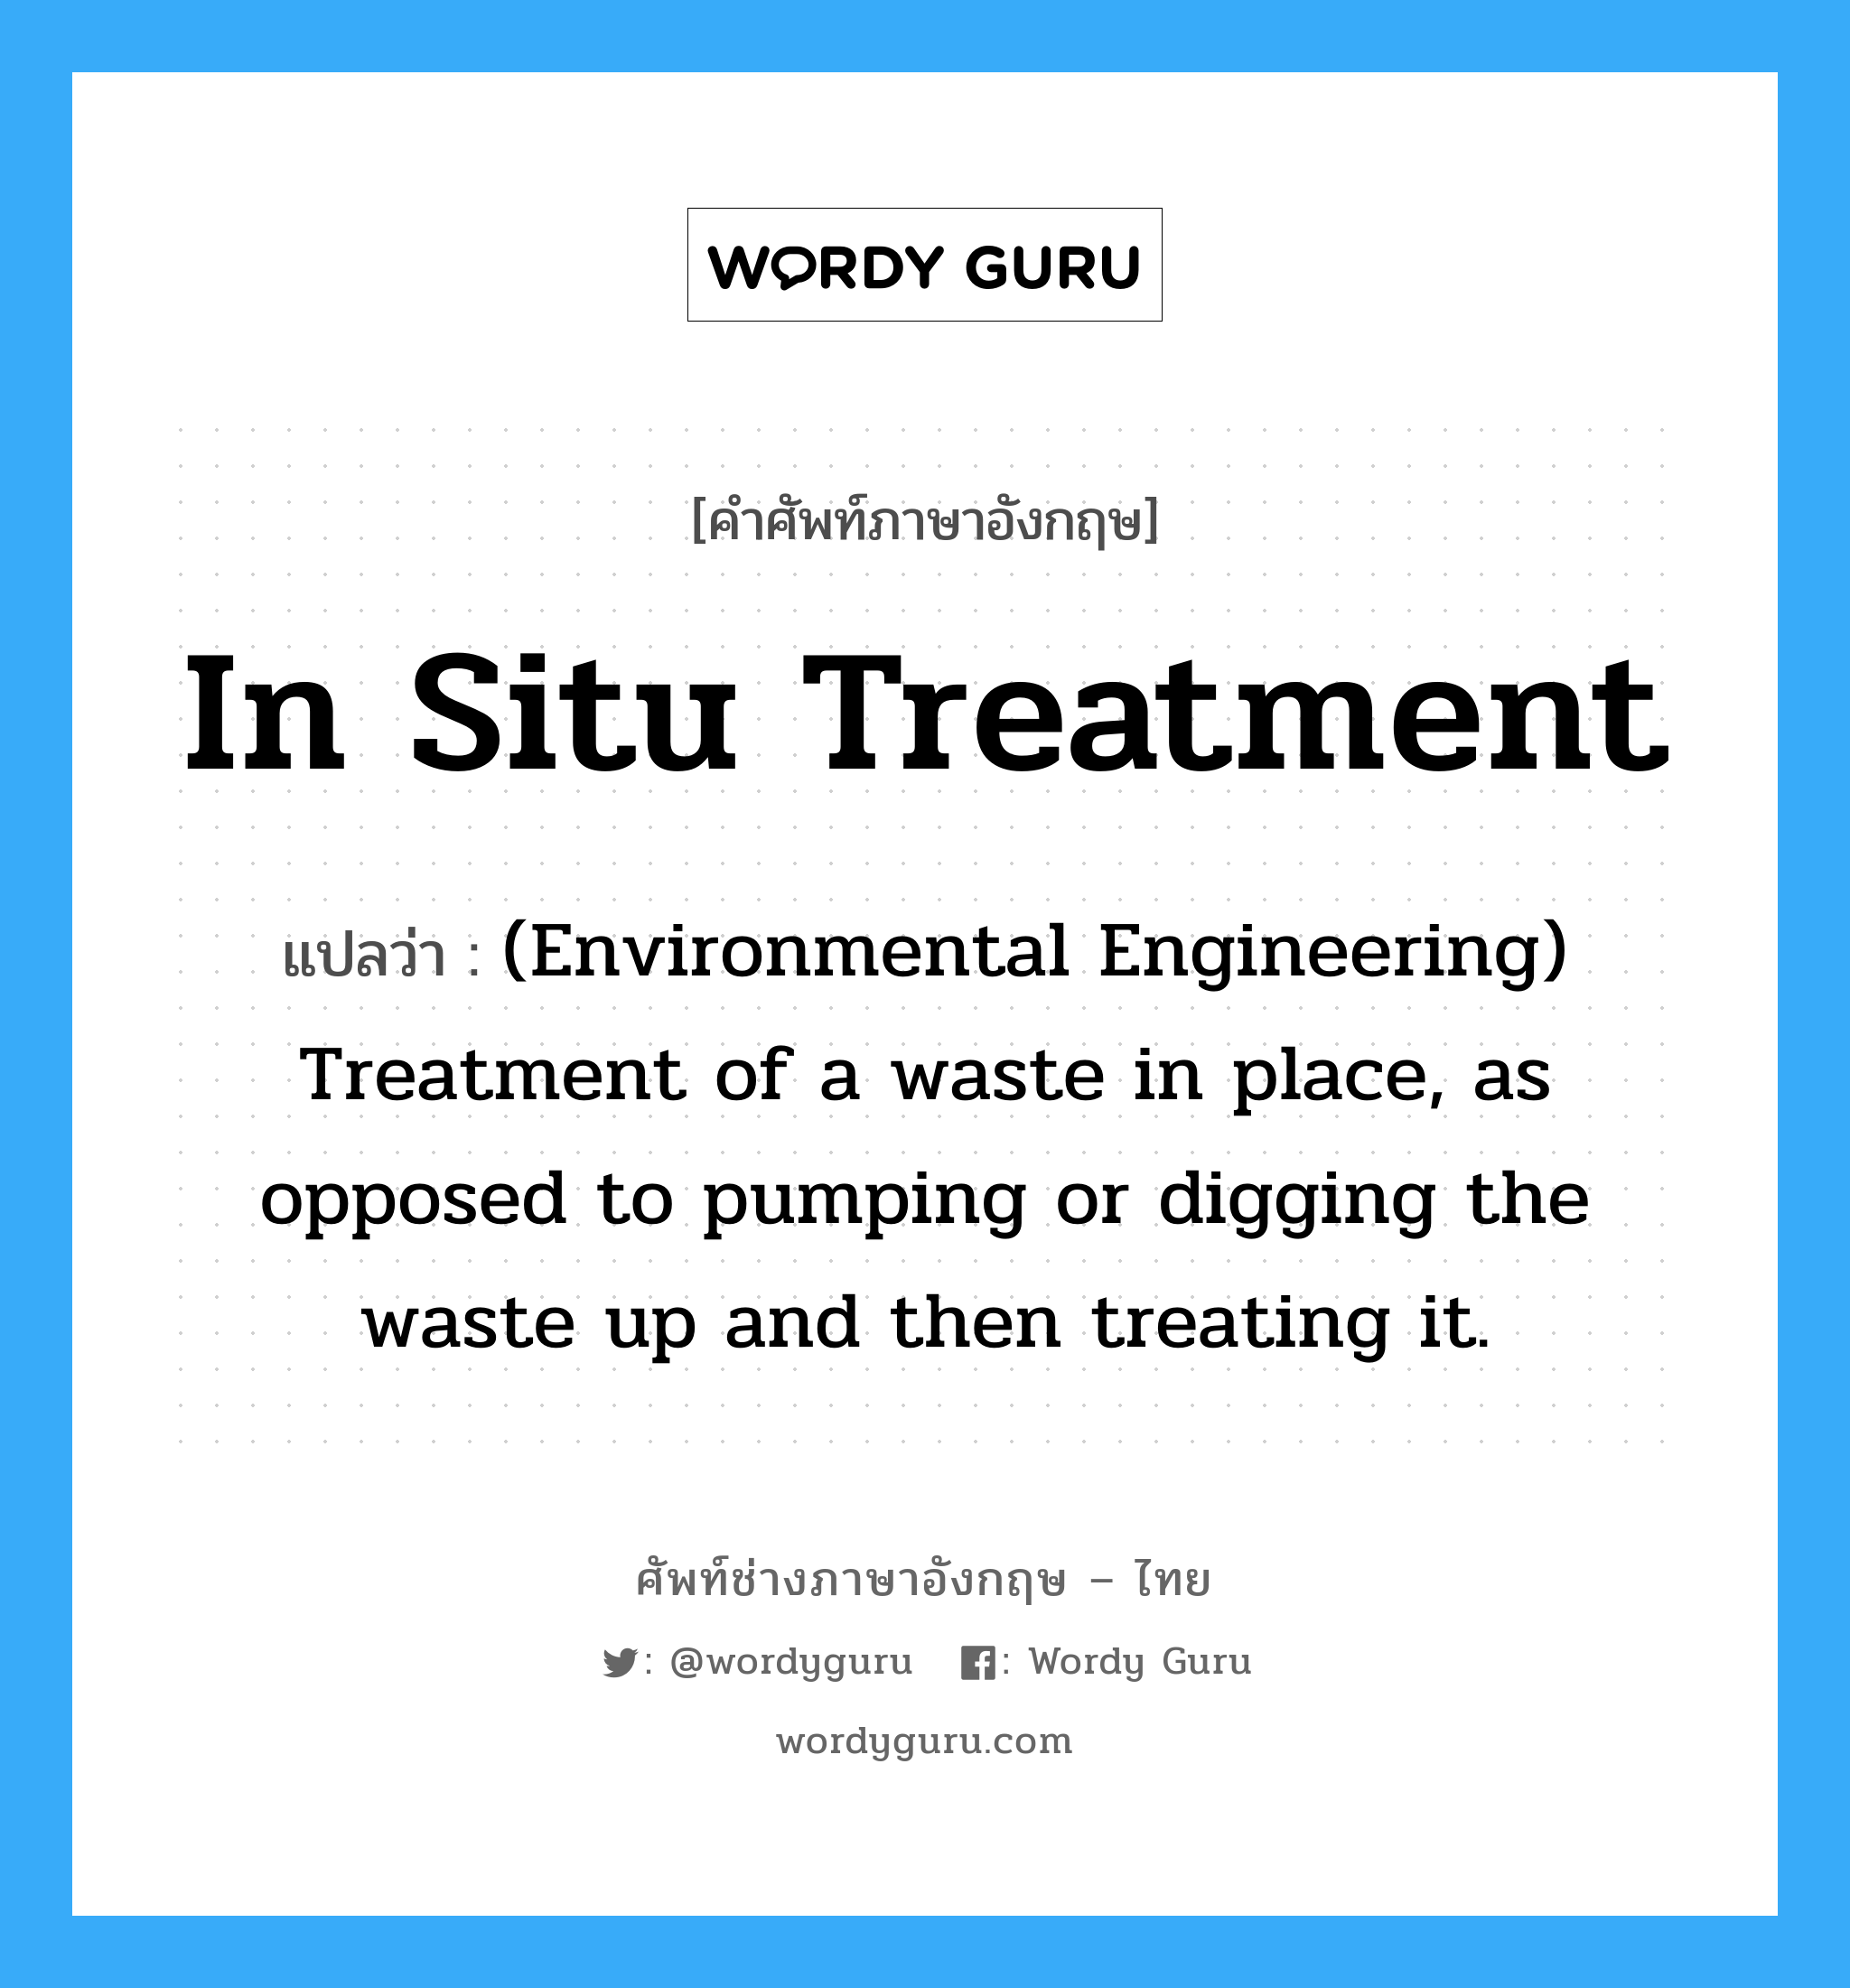 In situ treatment แปลว่า?, คำศัพท์ช่างภาษาอังกฤษ - ไทย In situ treatment คำศัพท์ภาษาอังกฤษ In situ treatment แปลว่า (Environmental Engineering) Treatment of a waste in place, as opposed to pumping or digging the waste up and then treating it.